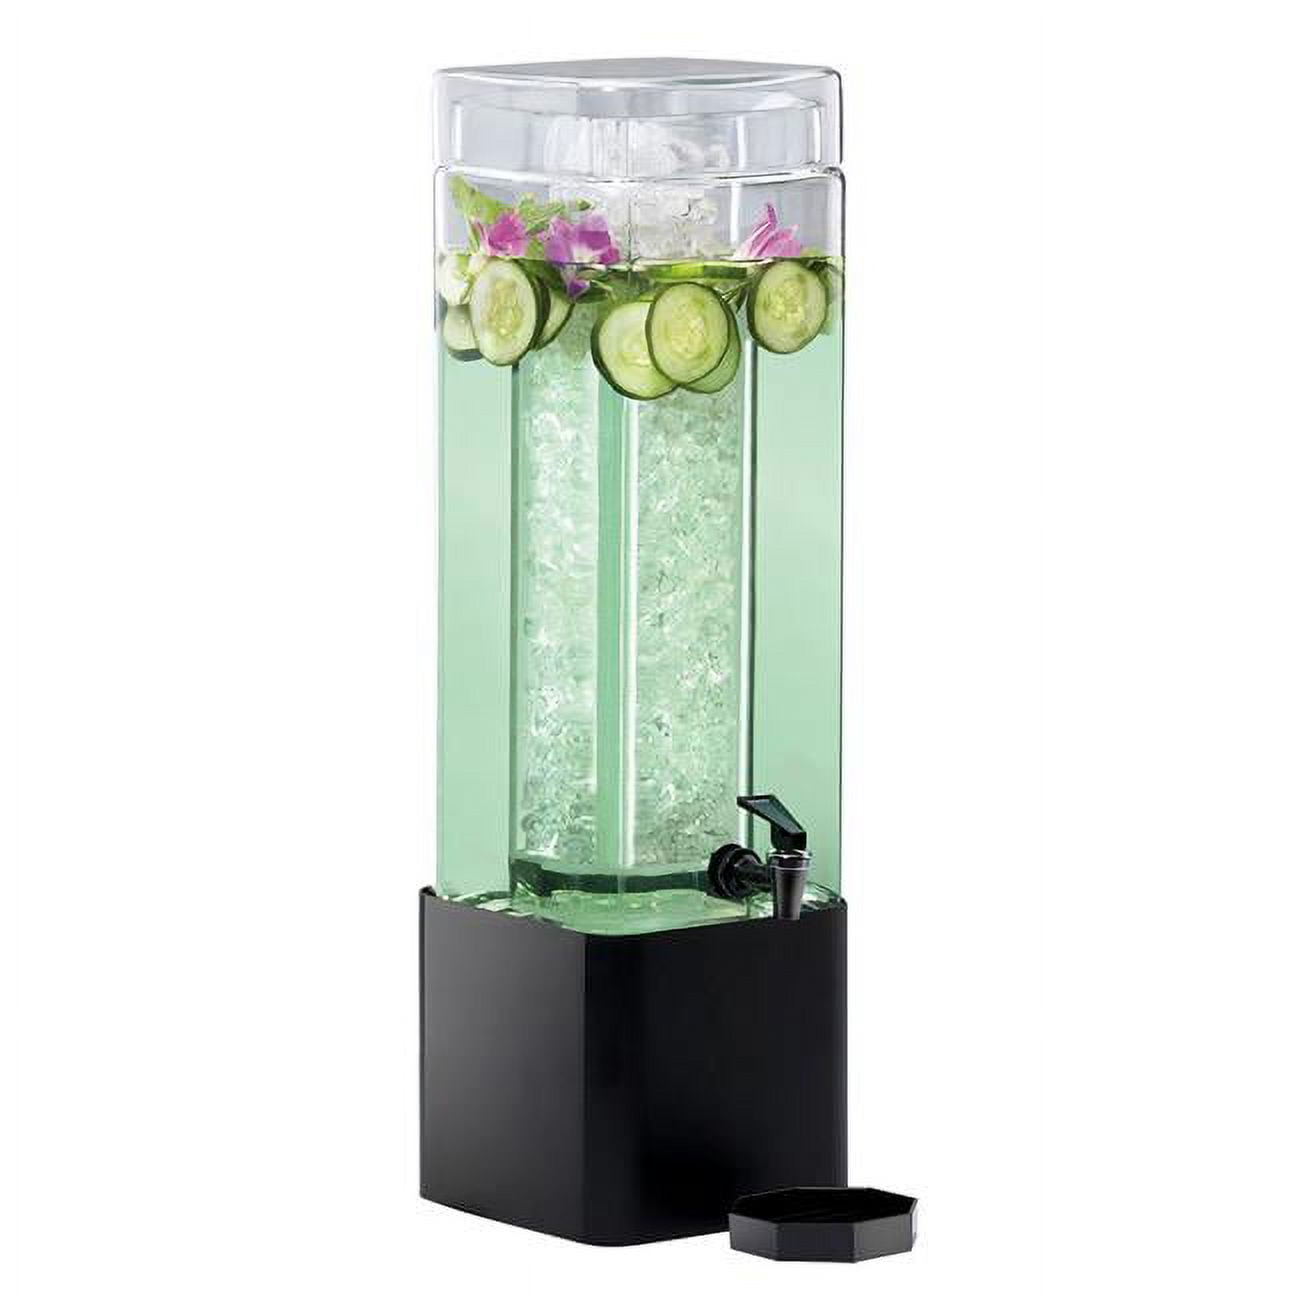 Madison Beverage Dispensers - Cal-Mil Plastic Products Inc.